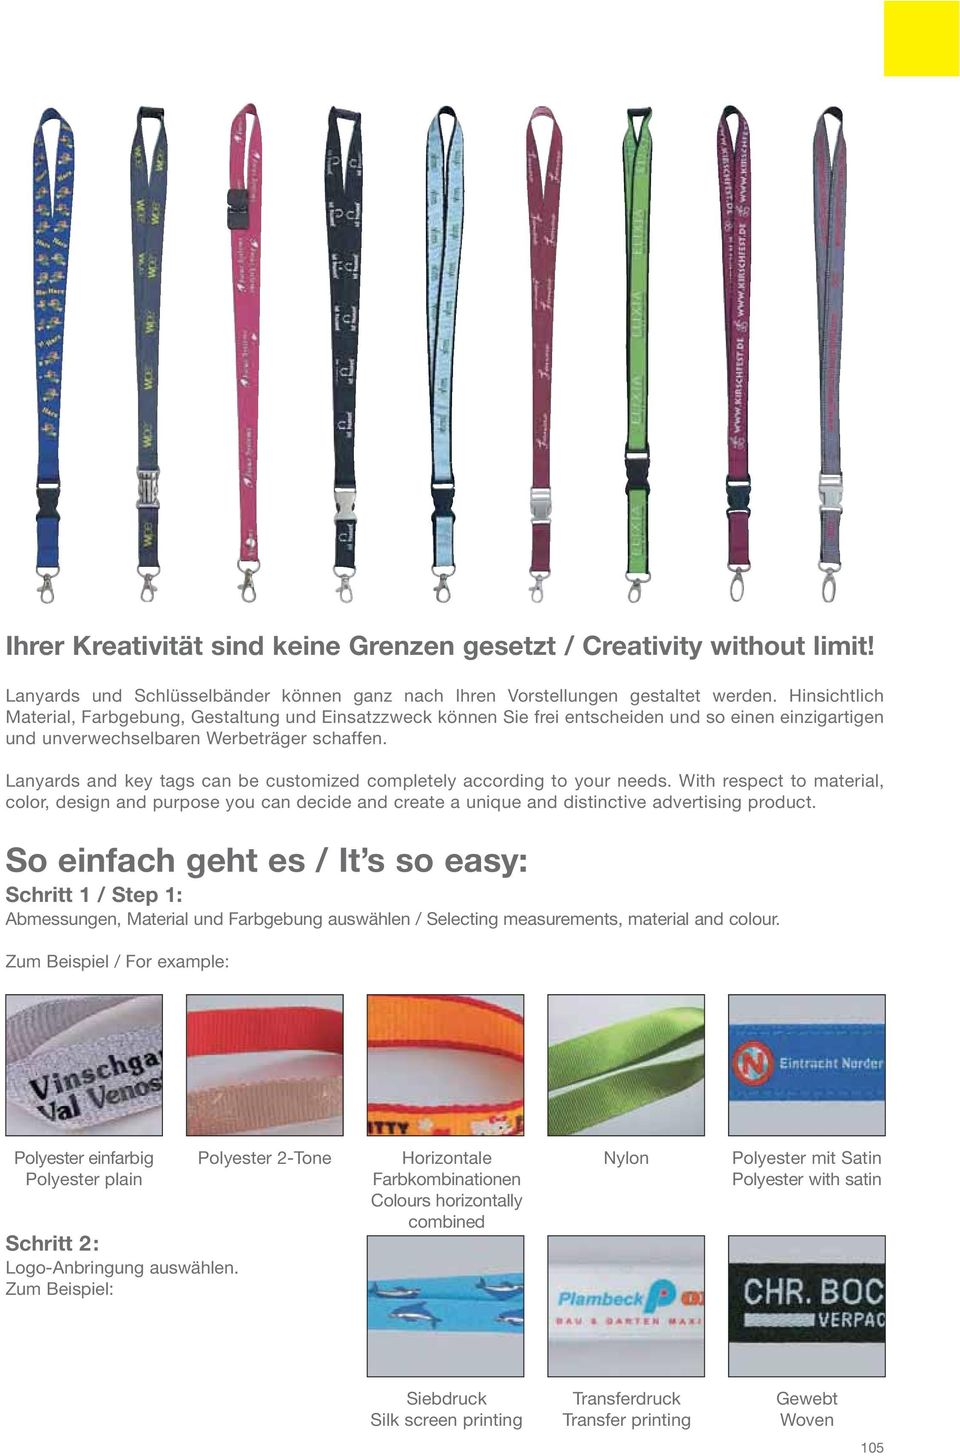 Lanyards and key tags can be customized completely according to your needs. With respect to material, color, design and purpose you can decide and create a unique and distinctive advertising product.